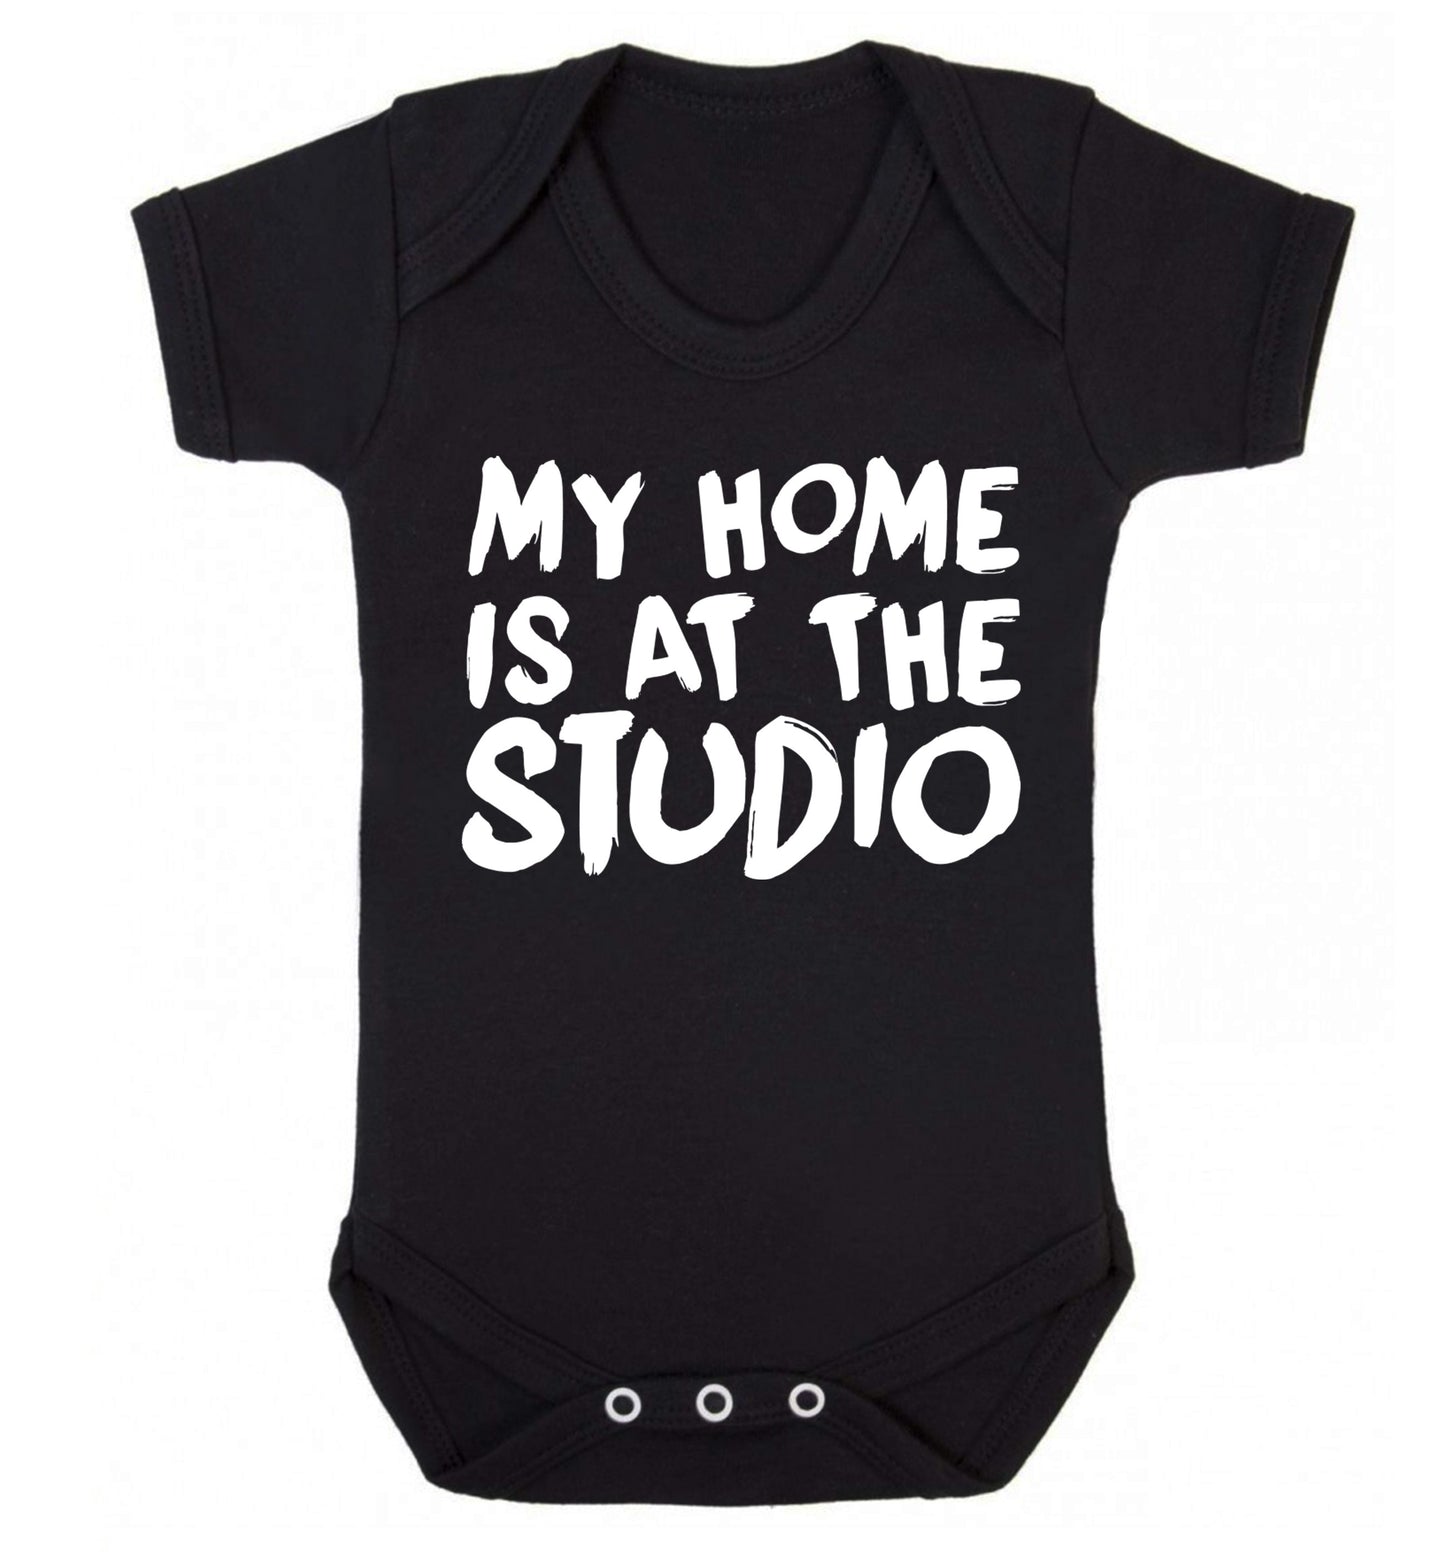 My home is at the studio Baby Vest black 18-24 months